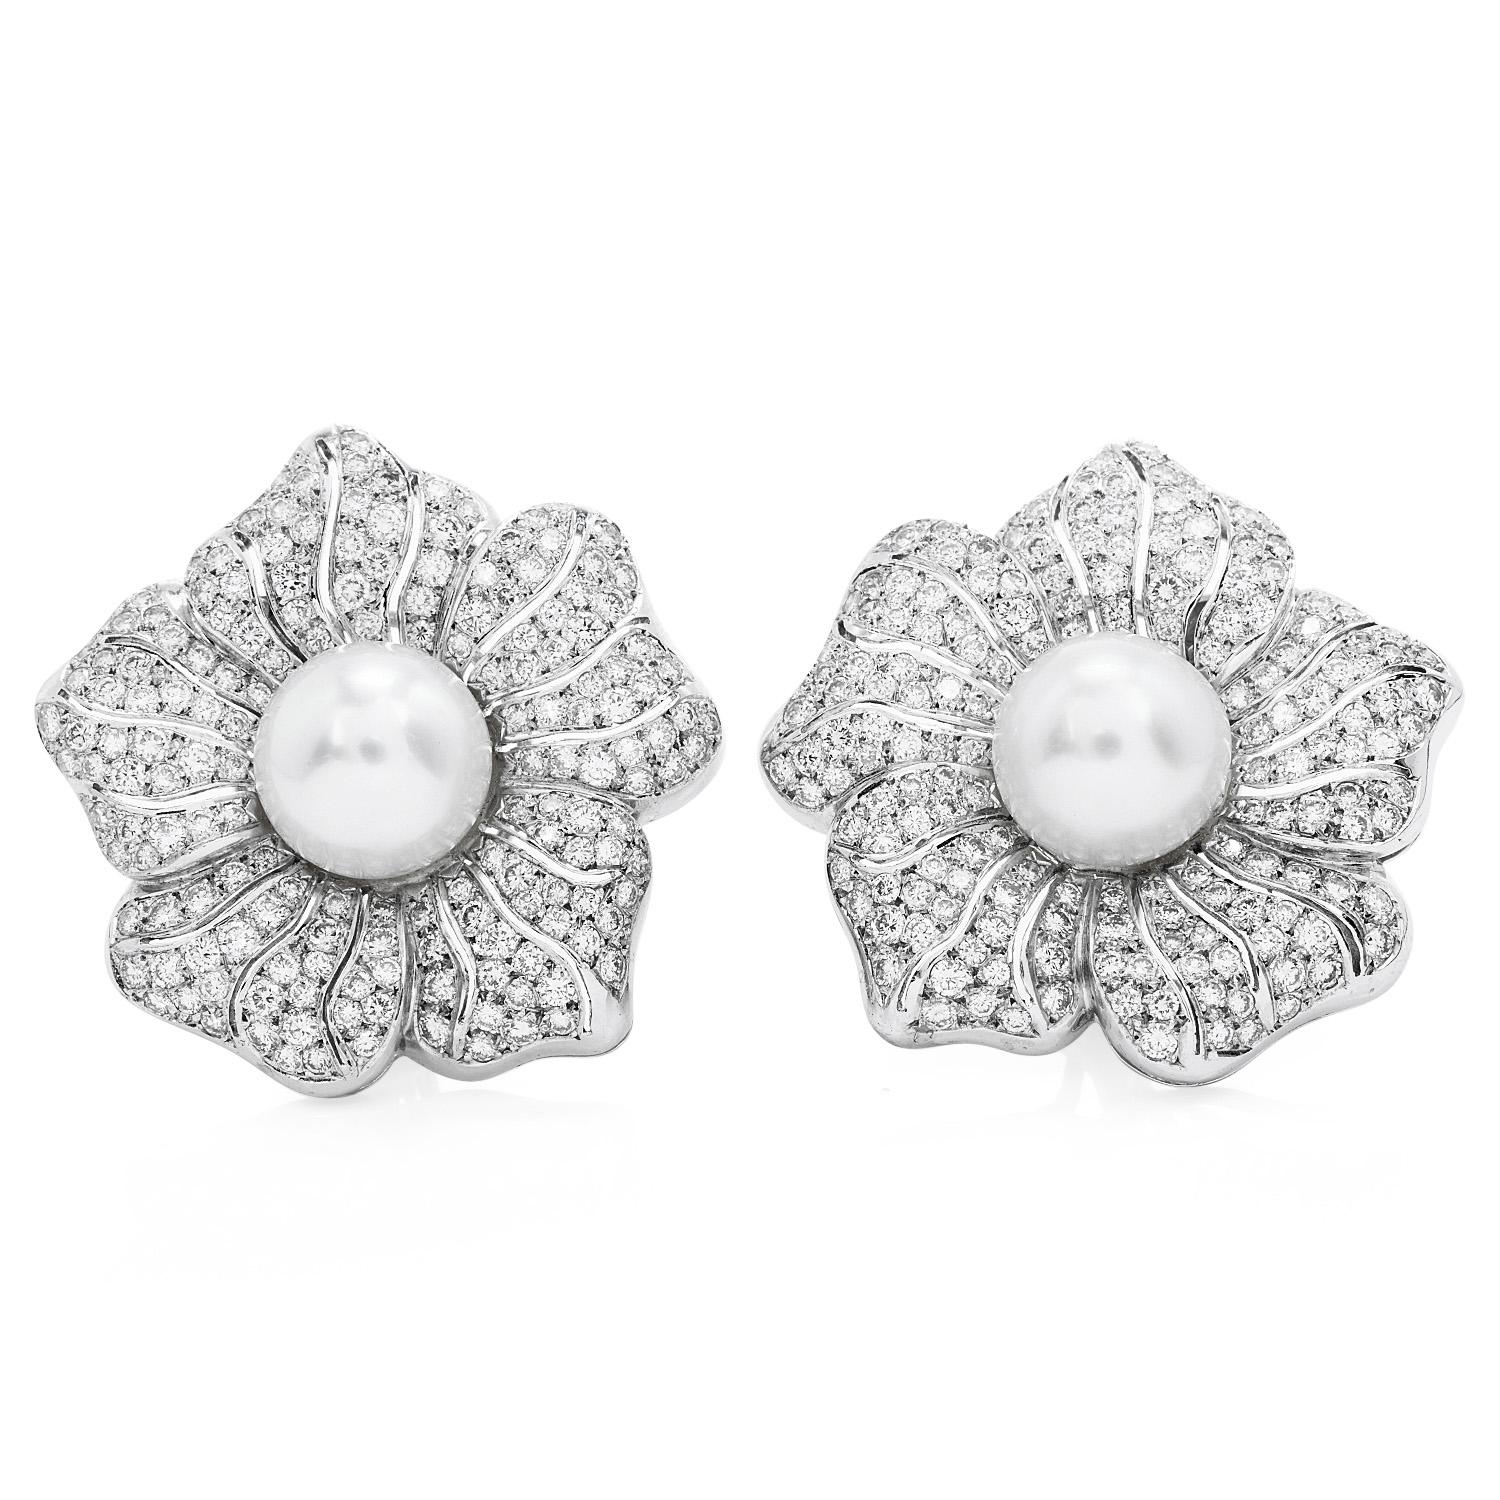 These are statement pieces for the empowered woman. Crafted in solid platinum, centered with two 12.5 mm South pearls, high luster & pinkish silver undertones.  flanked by a cluster of round-cut diamonds weighing approx. 10.30 carats, graded